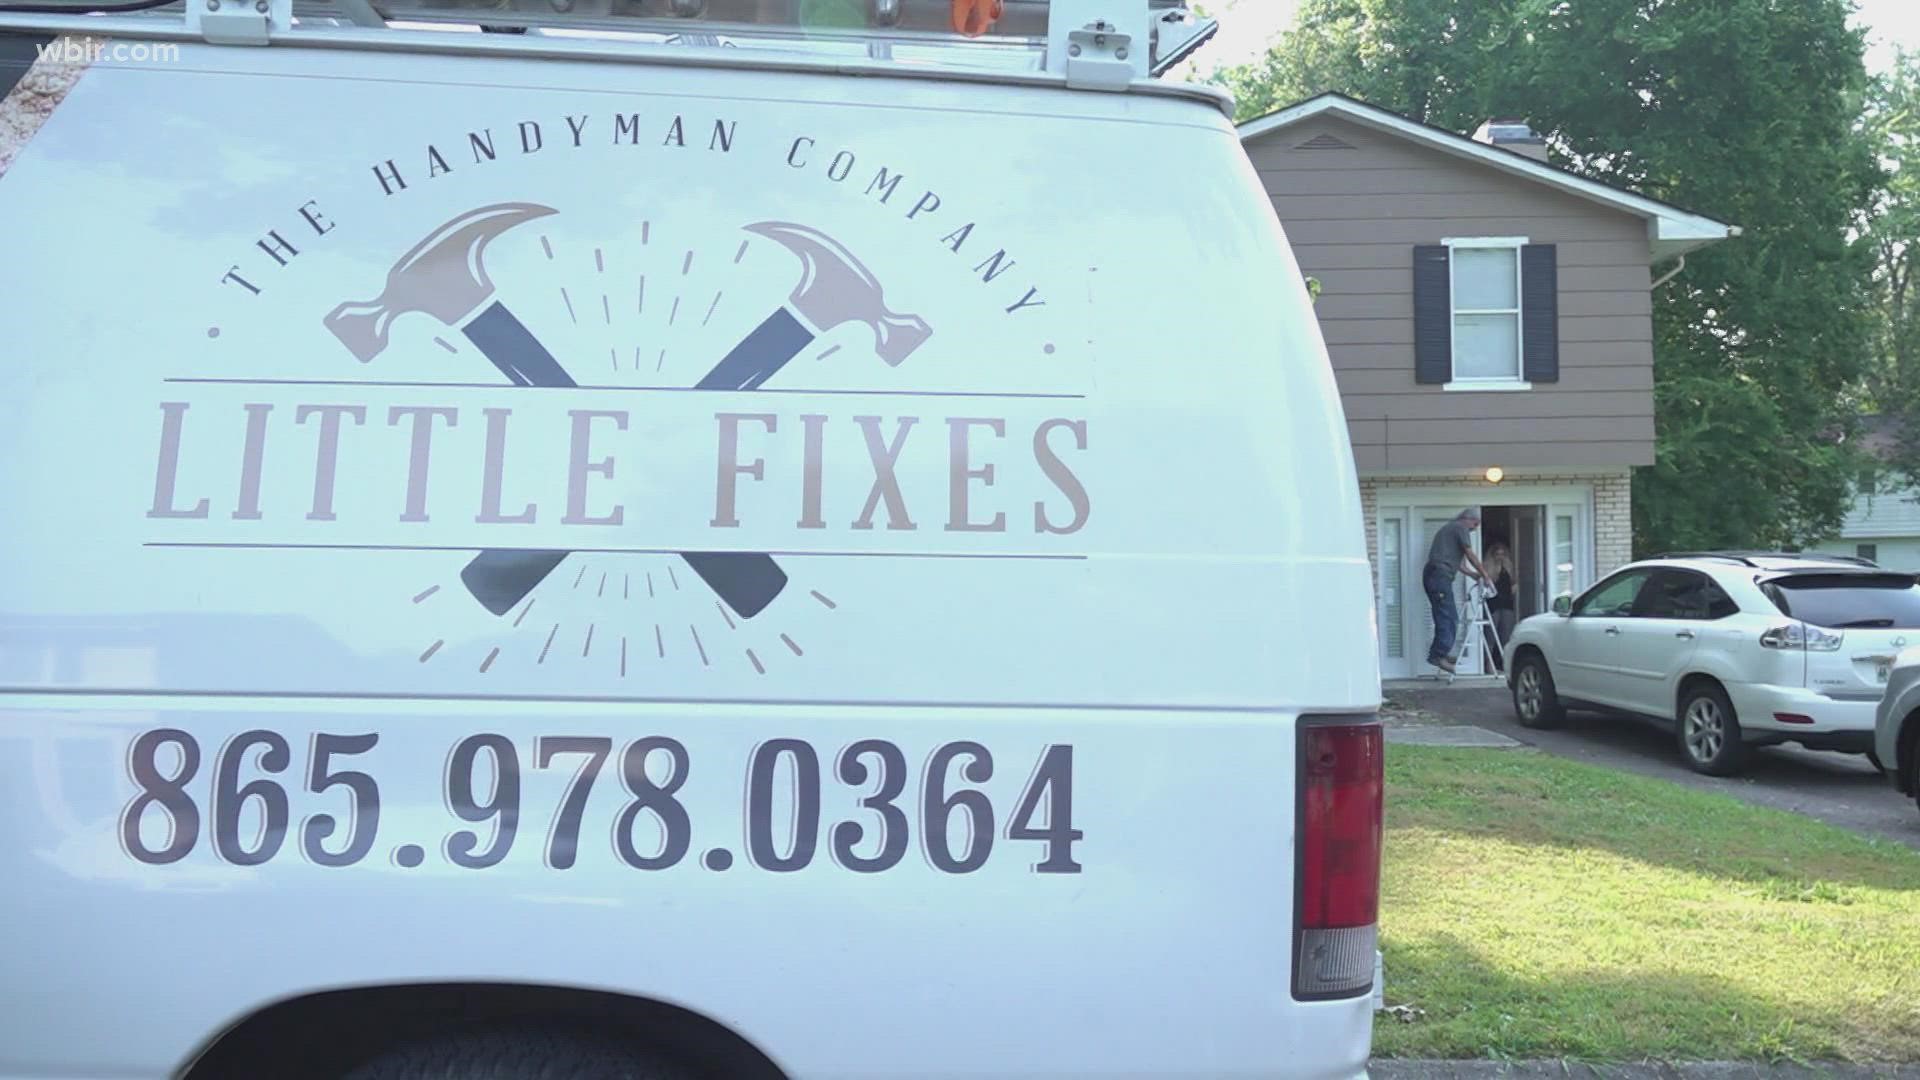 Leona Skiles uses her own business to help single mothers and the elderly with repairs around the house.